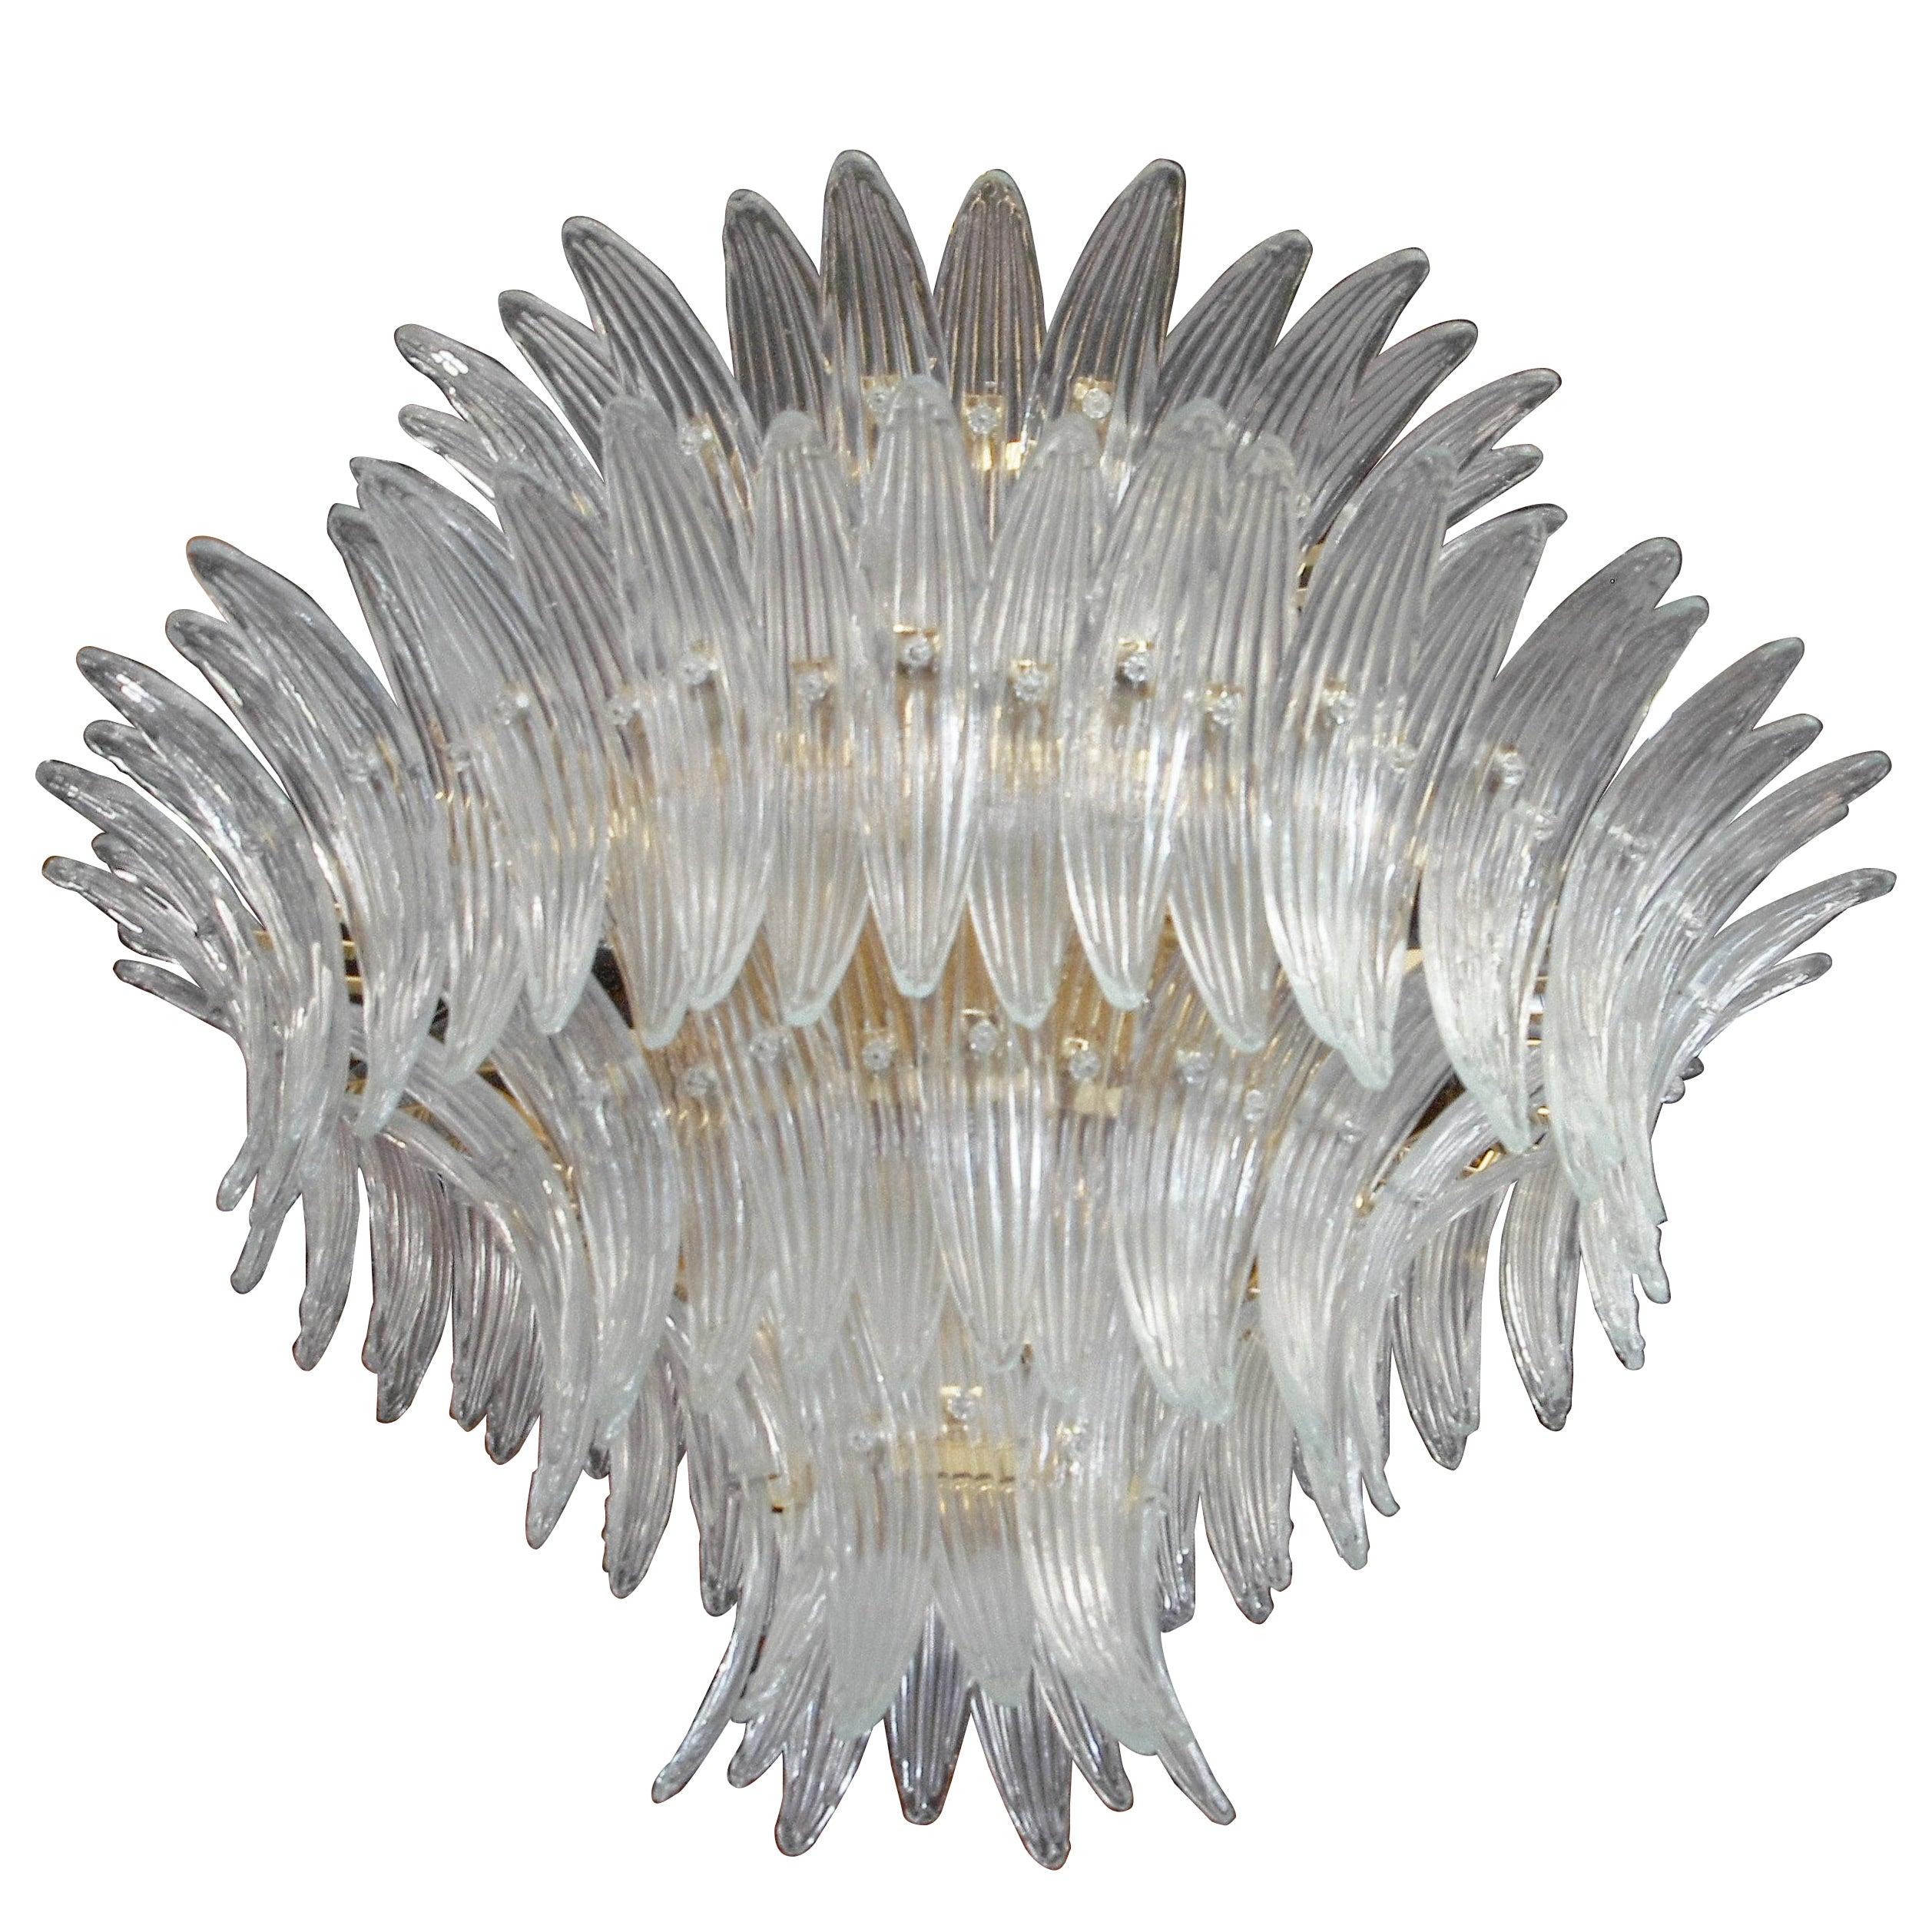 Italian Palmette chandelier with clear Murano glass leaves arranged on four tiers and mounted on gold-plated metal frame by Fabio Ltd / Made in Italy
16 lights / E26 or E27 type / max 60W each
Measures: Diameter 36 inches / Height 27 inches plus